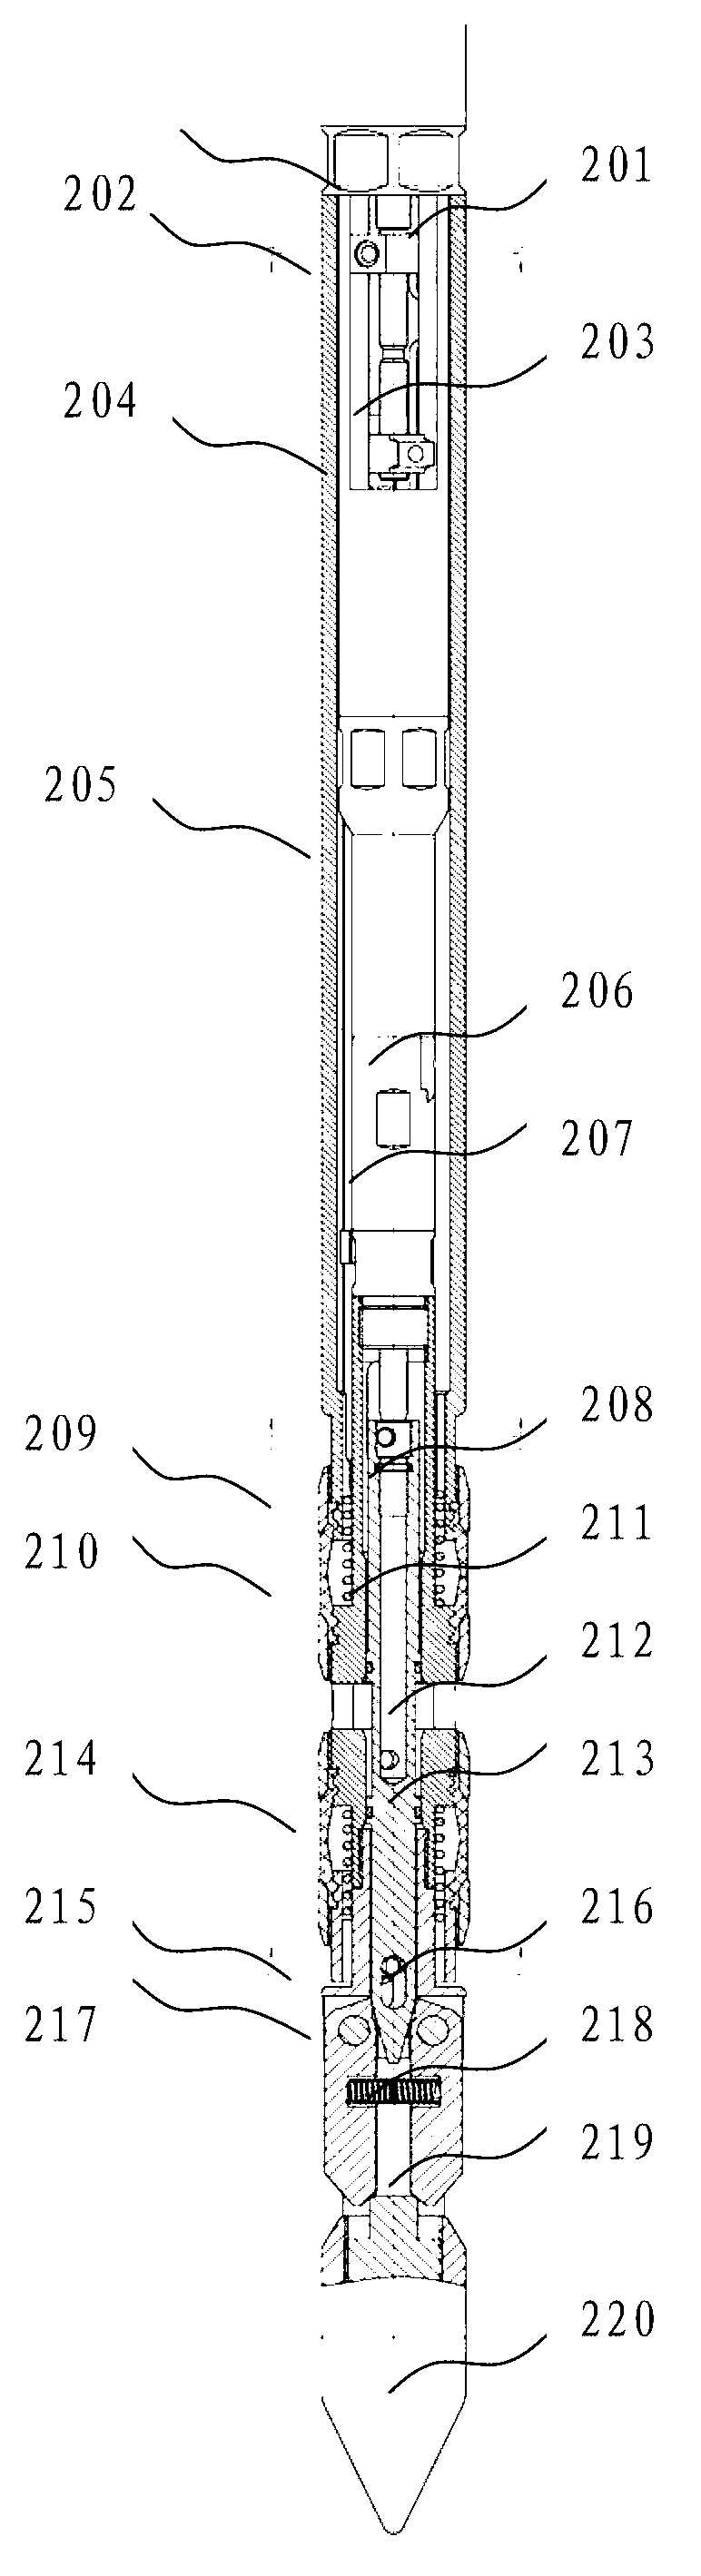 Direct-reading examining seal instrument suitable for eccentric water distributor